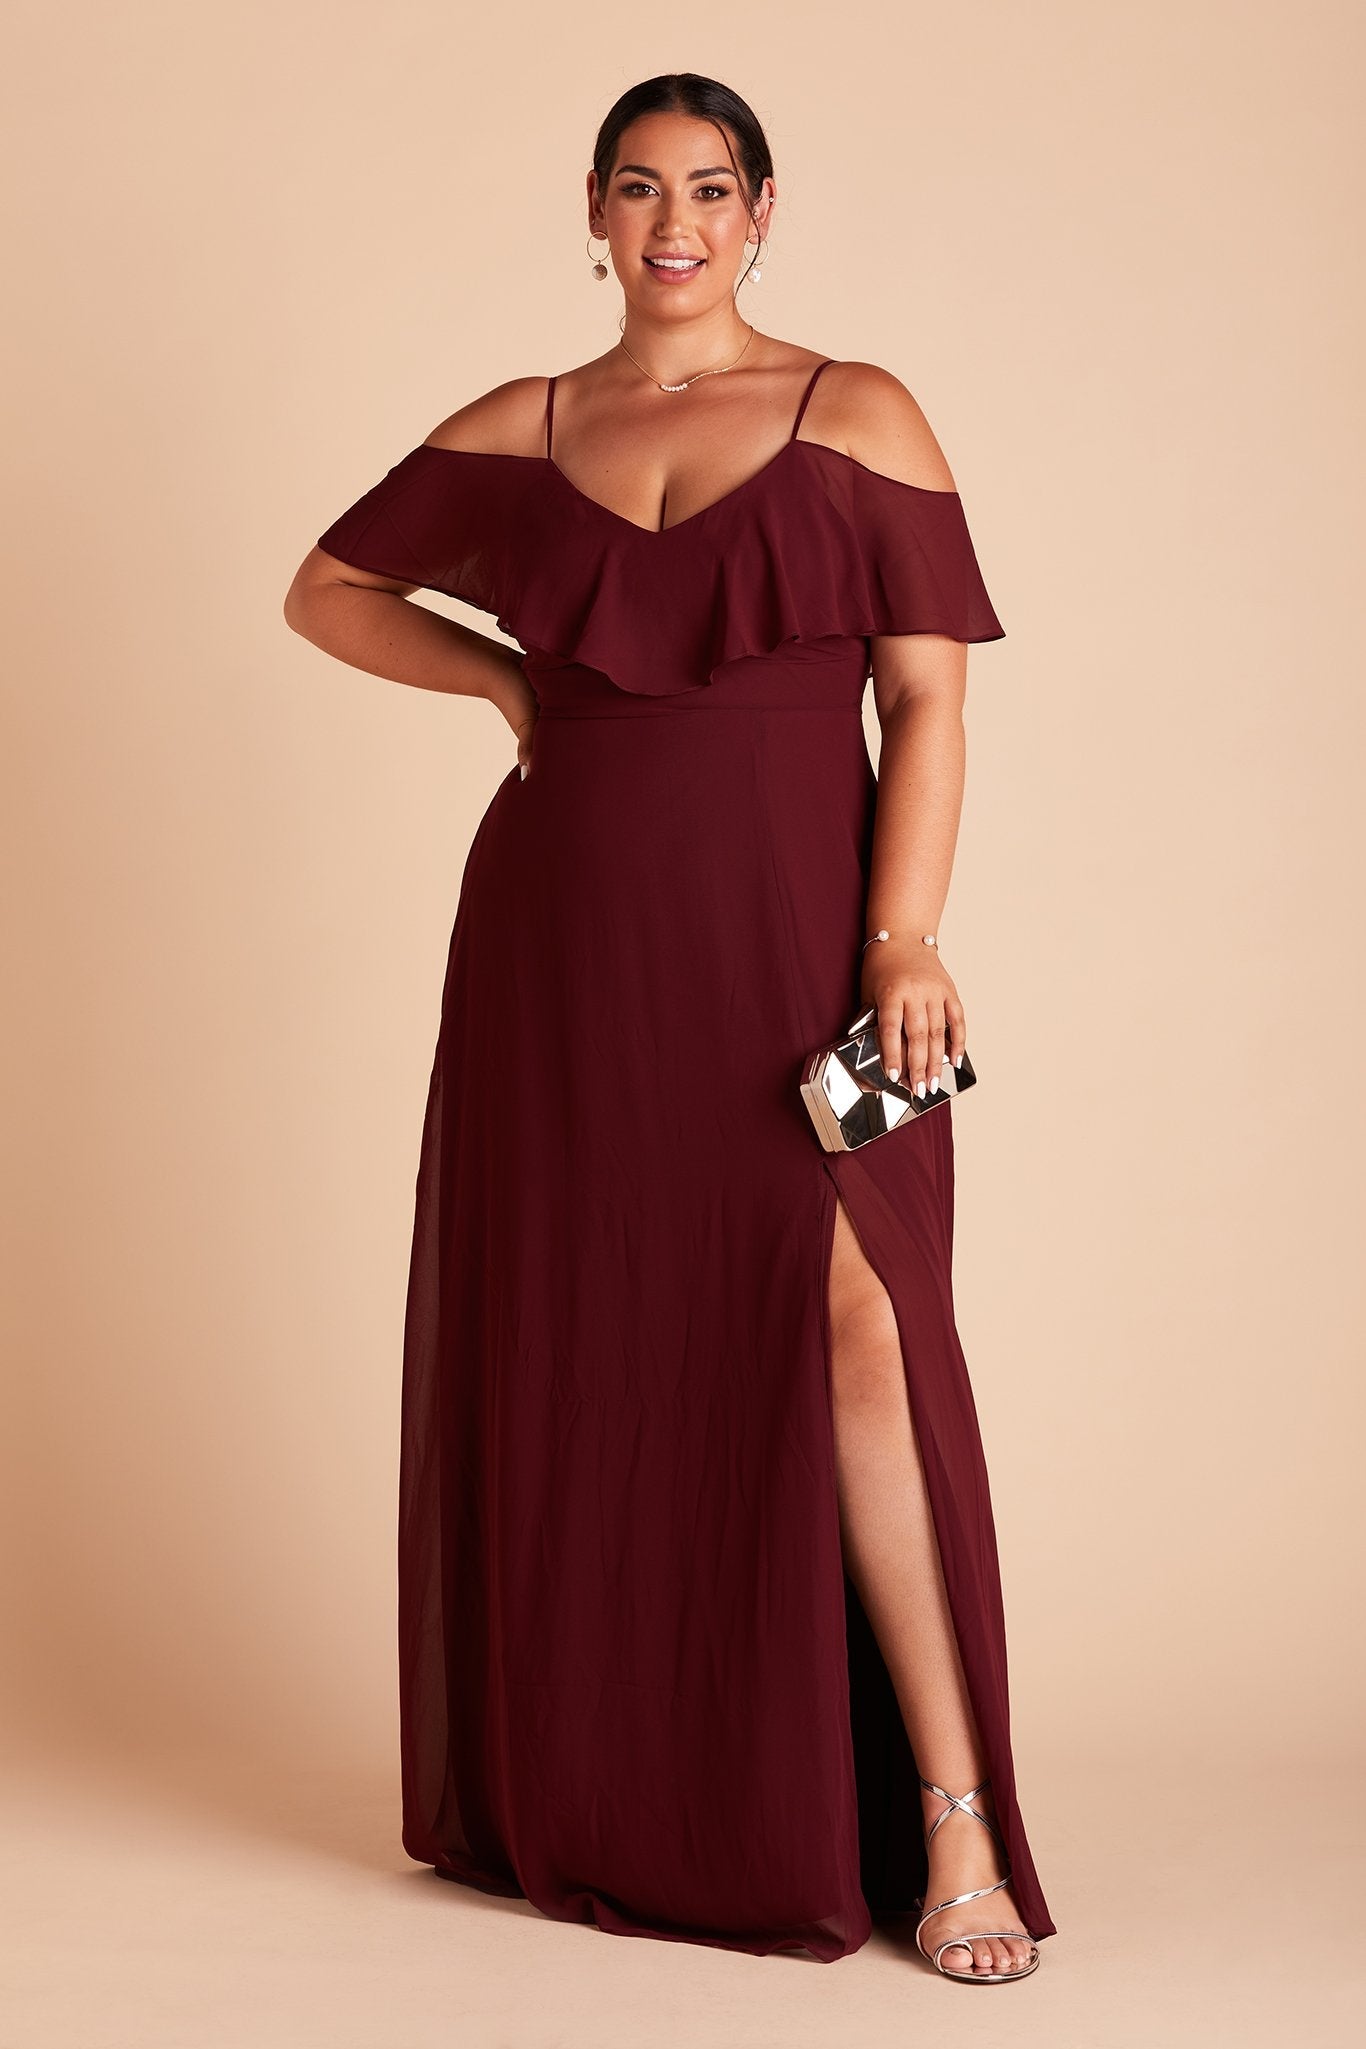 Jane convertible plus size bridesmaid dress with slit in Cabernet Burgundy chiffon by Birdy Grey, front view